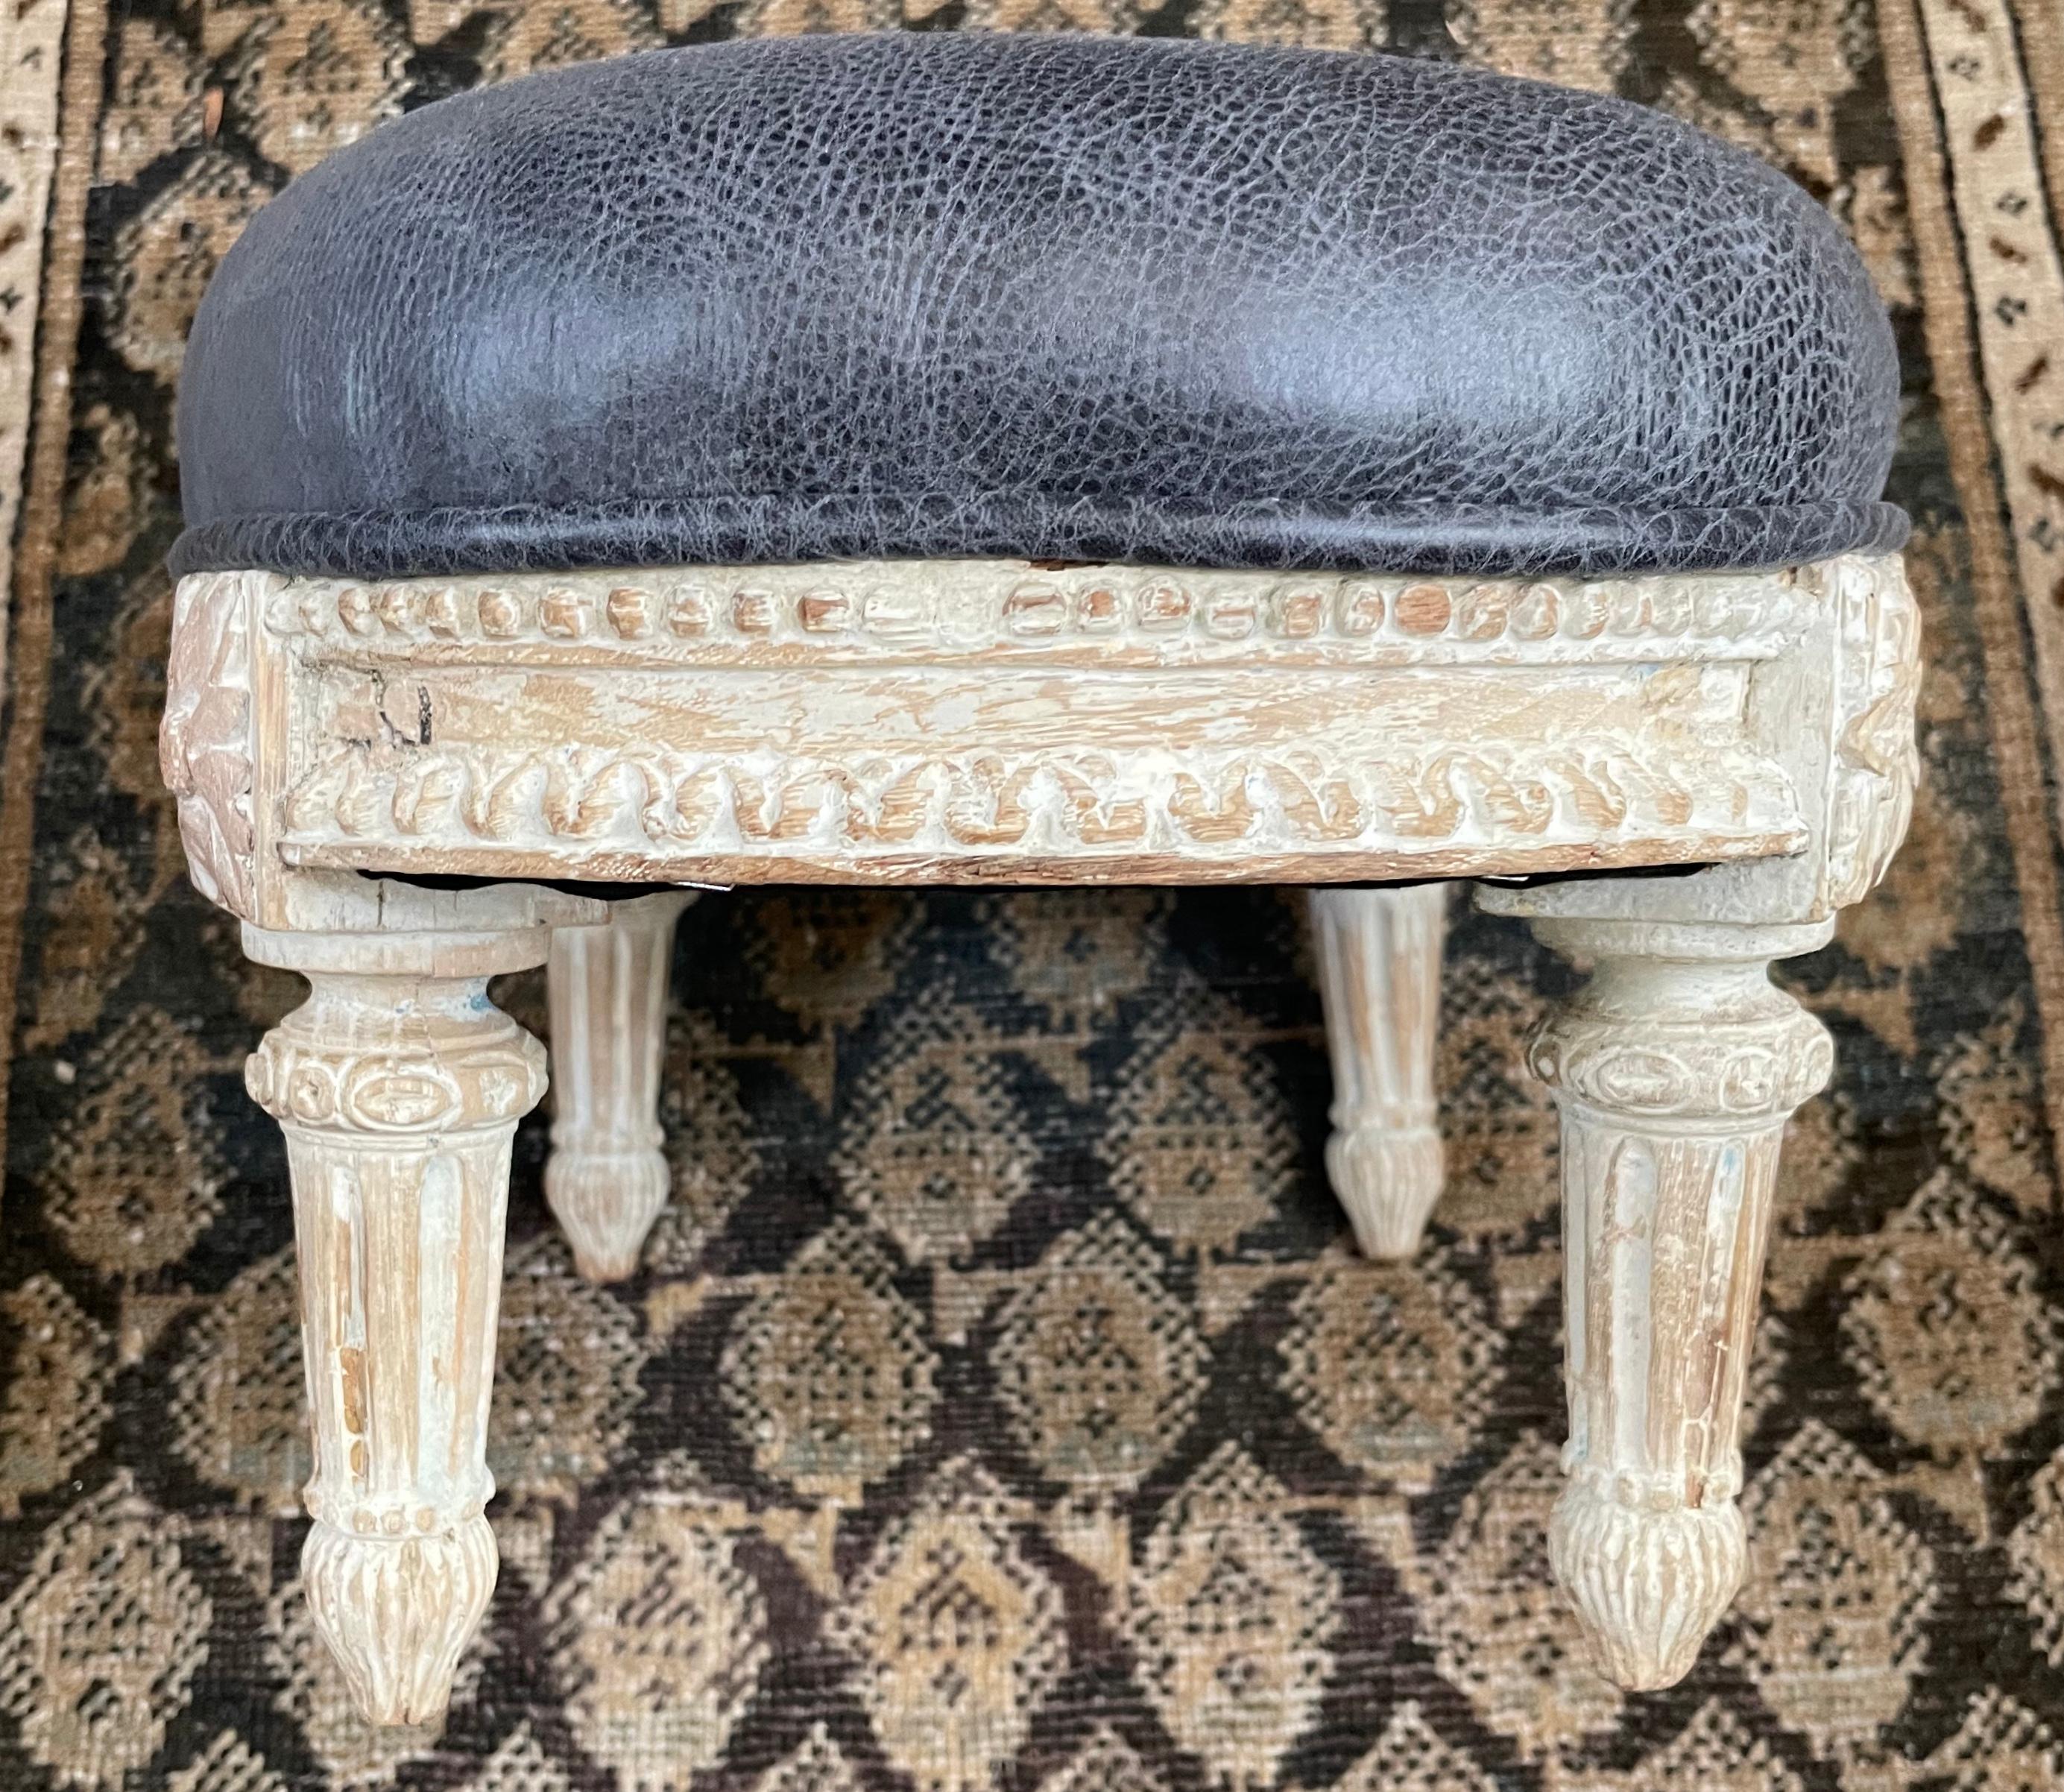 Louis XVI carved stool. Neoclassical Louis XVI period carved bleached white oval footstool with bead banded rim; foliate blocking above flute carved tapering legs, newly reupholstered in blue grey leather. France, early 19th century. 
Dimensions: